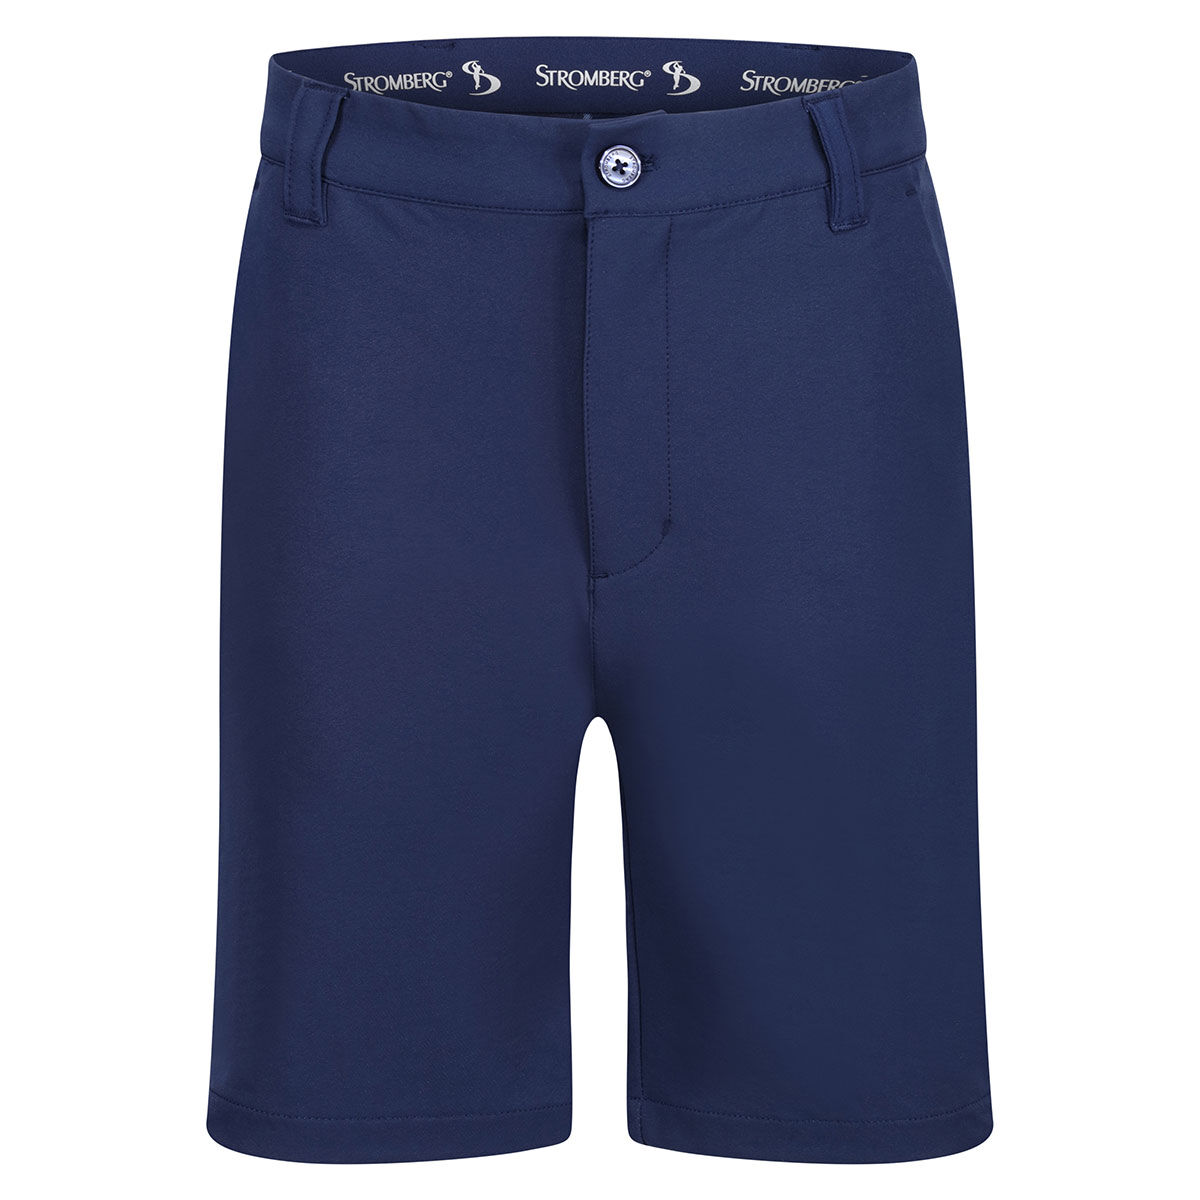 Stromberg Kids Blue Junior The Open Conan Shorts, Size: 9-10 years, 10-11 years | American Golf